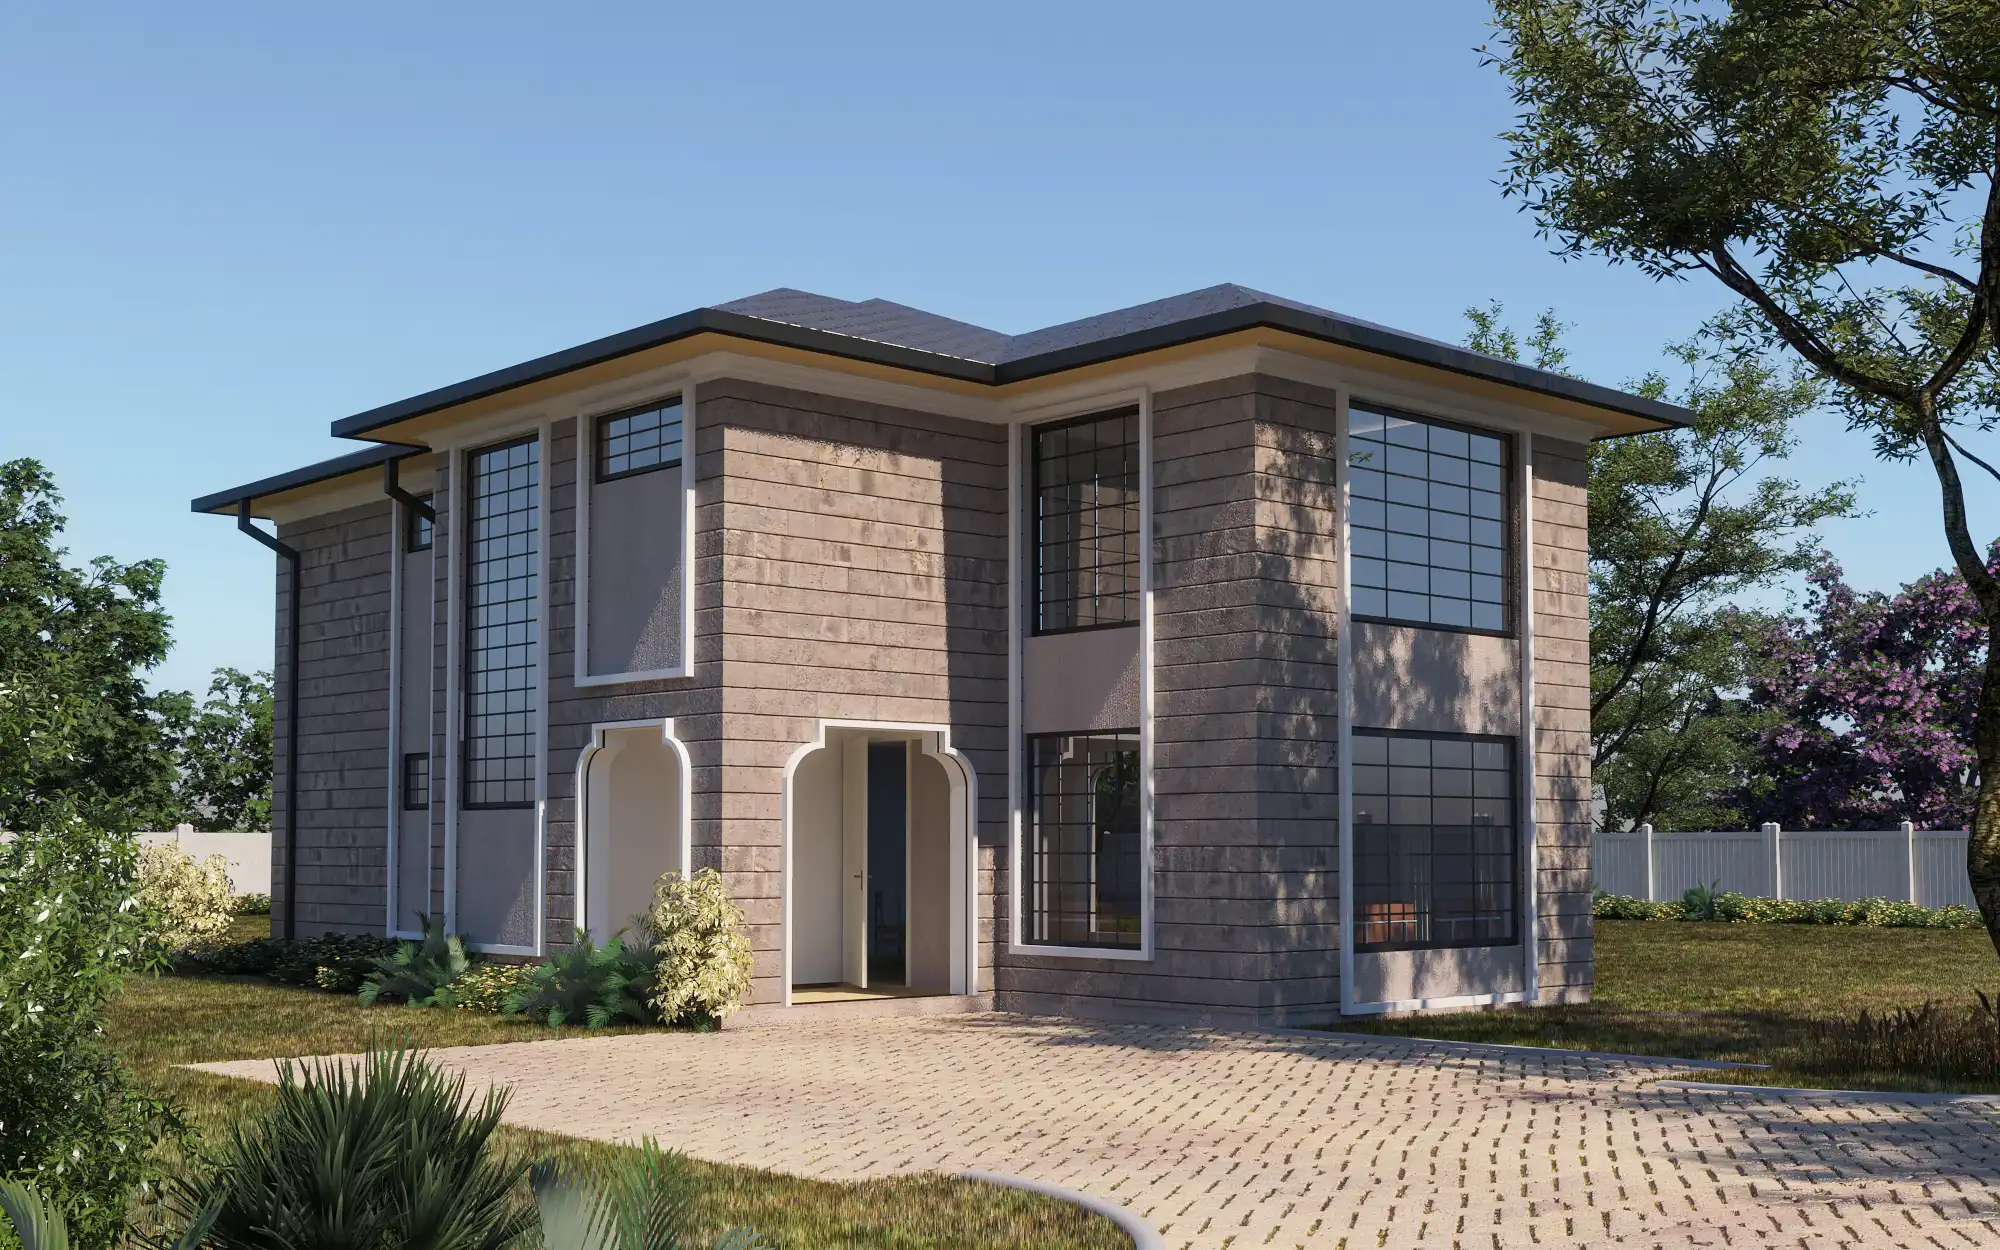 4 Bedroom Maisonette - ID 4241 - Front from Inuua Tujenge house plans with 4 bedrooms and 3 bathrooms. ( maisonette )